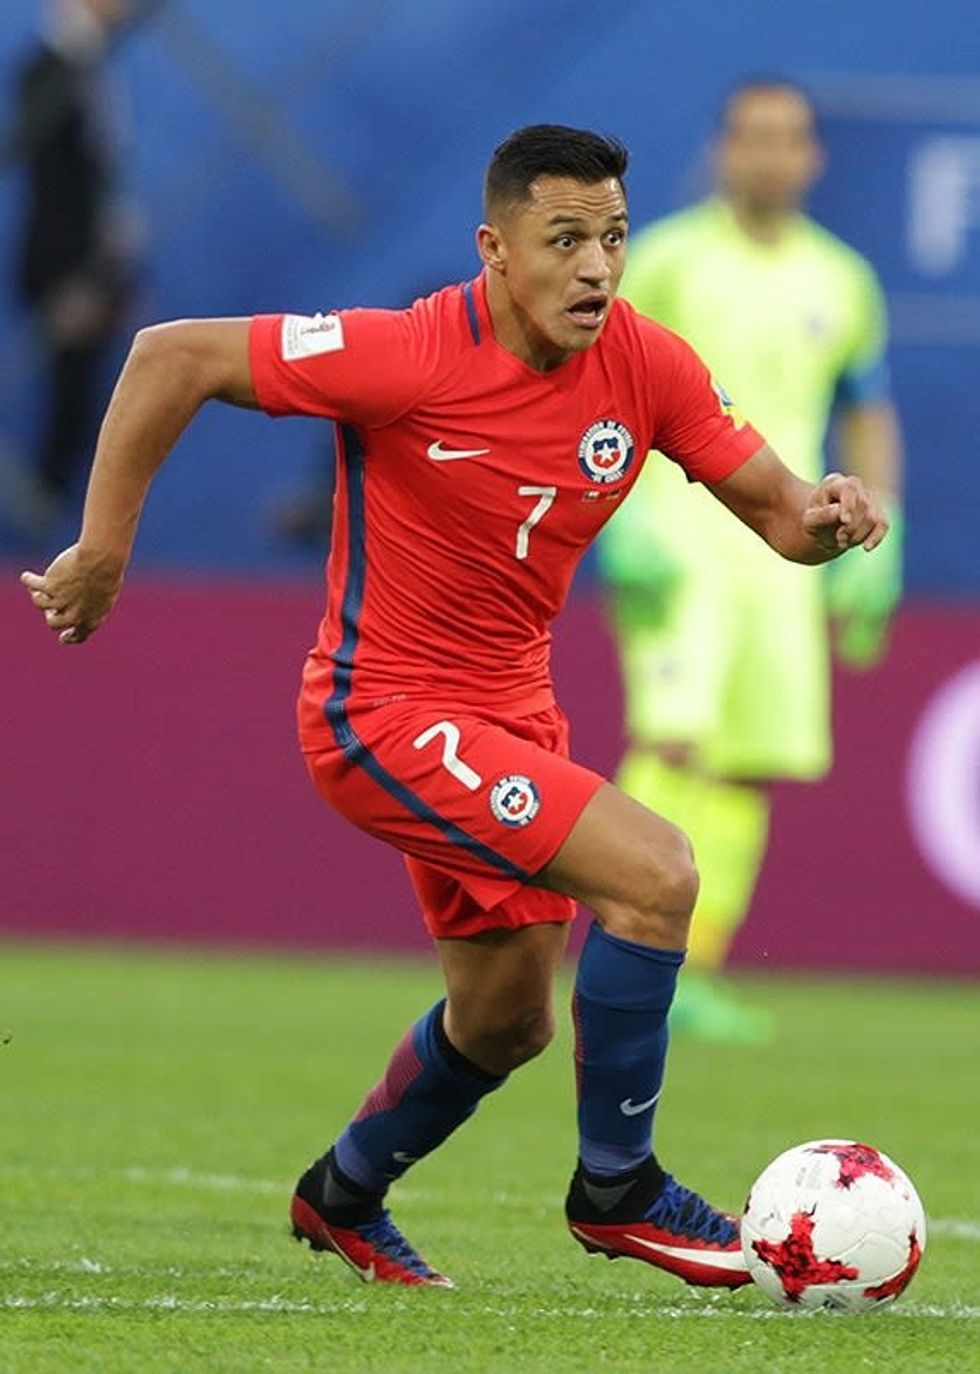 Weekly soccer update: Sanchez transfer highlights busy time on, off the pitch